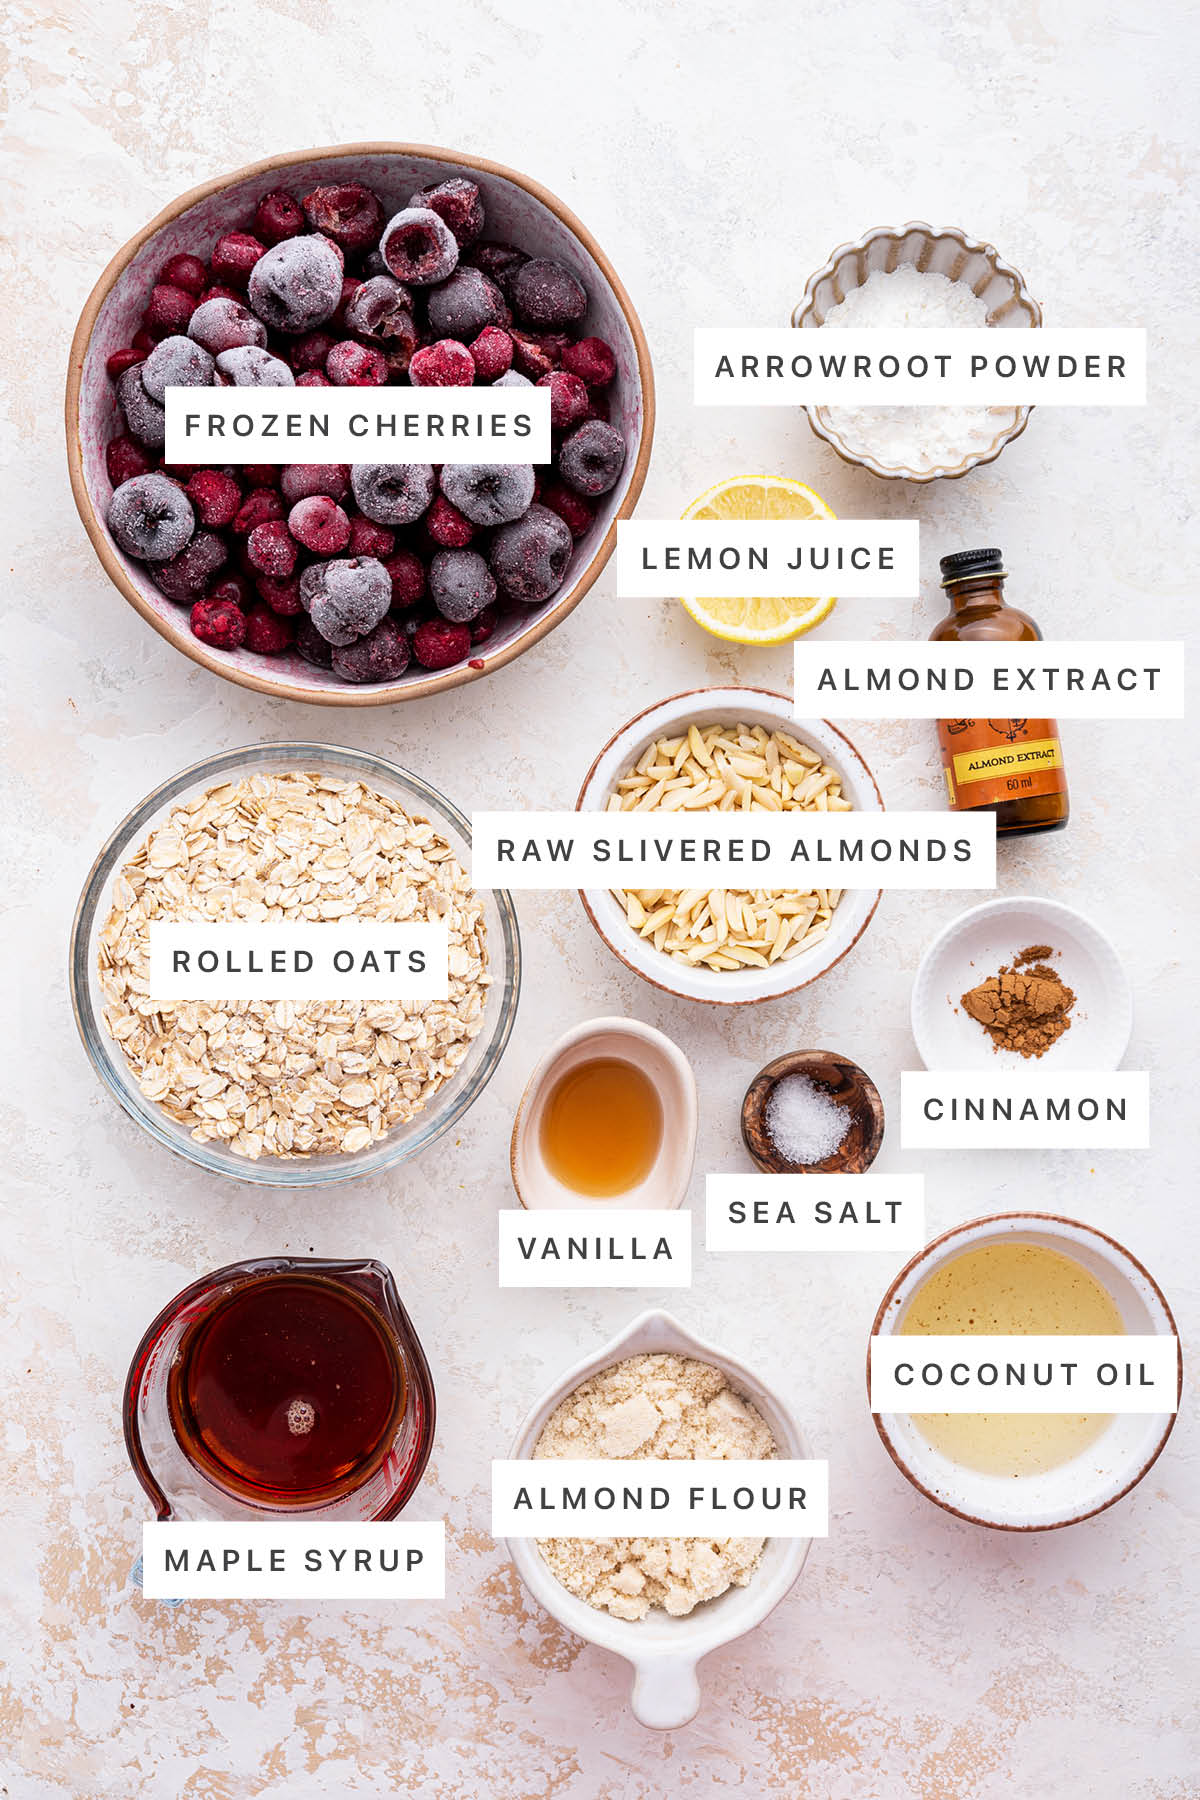 Ingredients measured out to make Healthy Cherry Crisp: frozen cherries, arrowroot powder, lemon juice, almond extract, raw slivered almonds, rolled oats, cinnamon, vanilla, sea salt, maple syrup, almond flour and coconut oil.